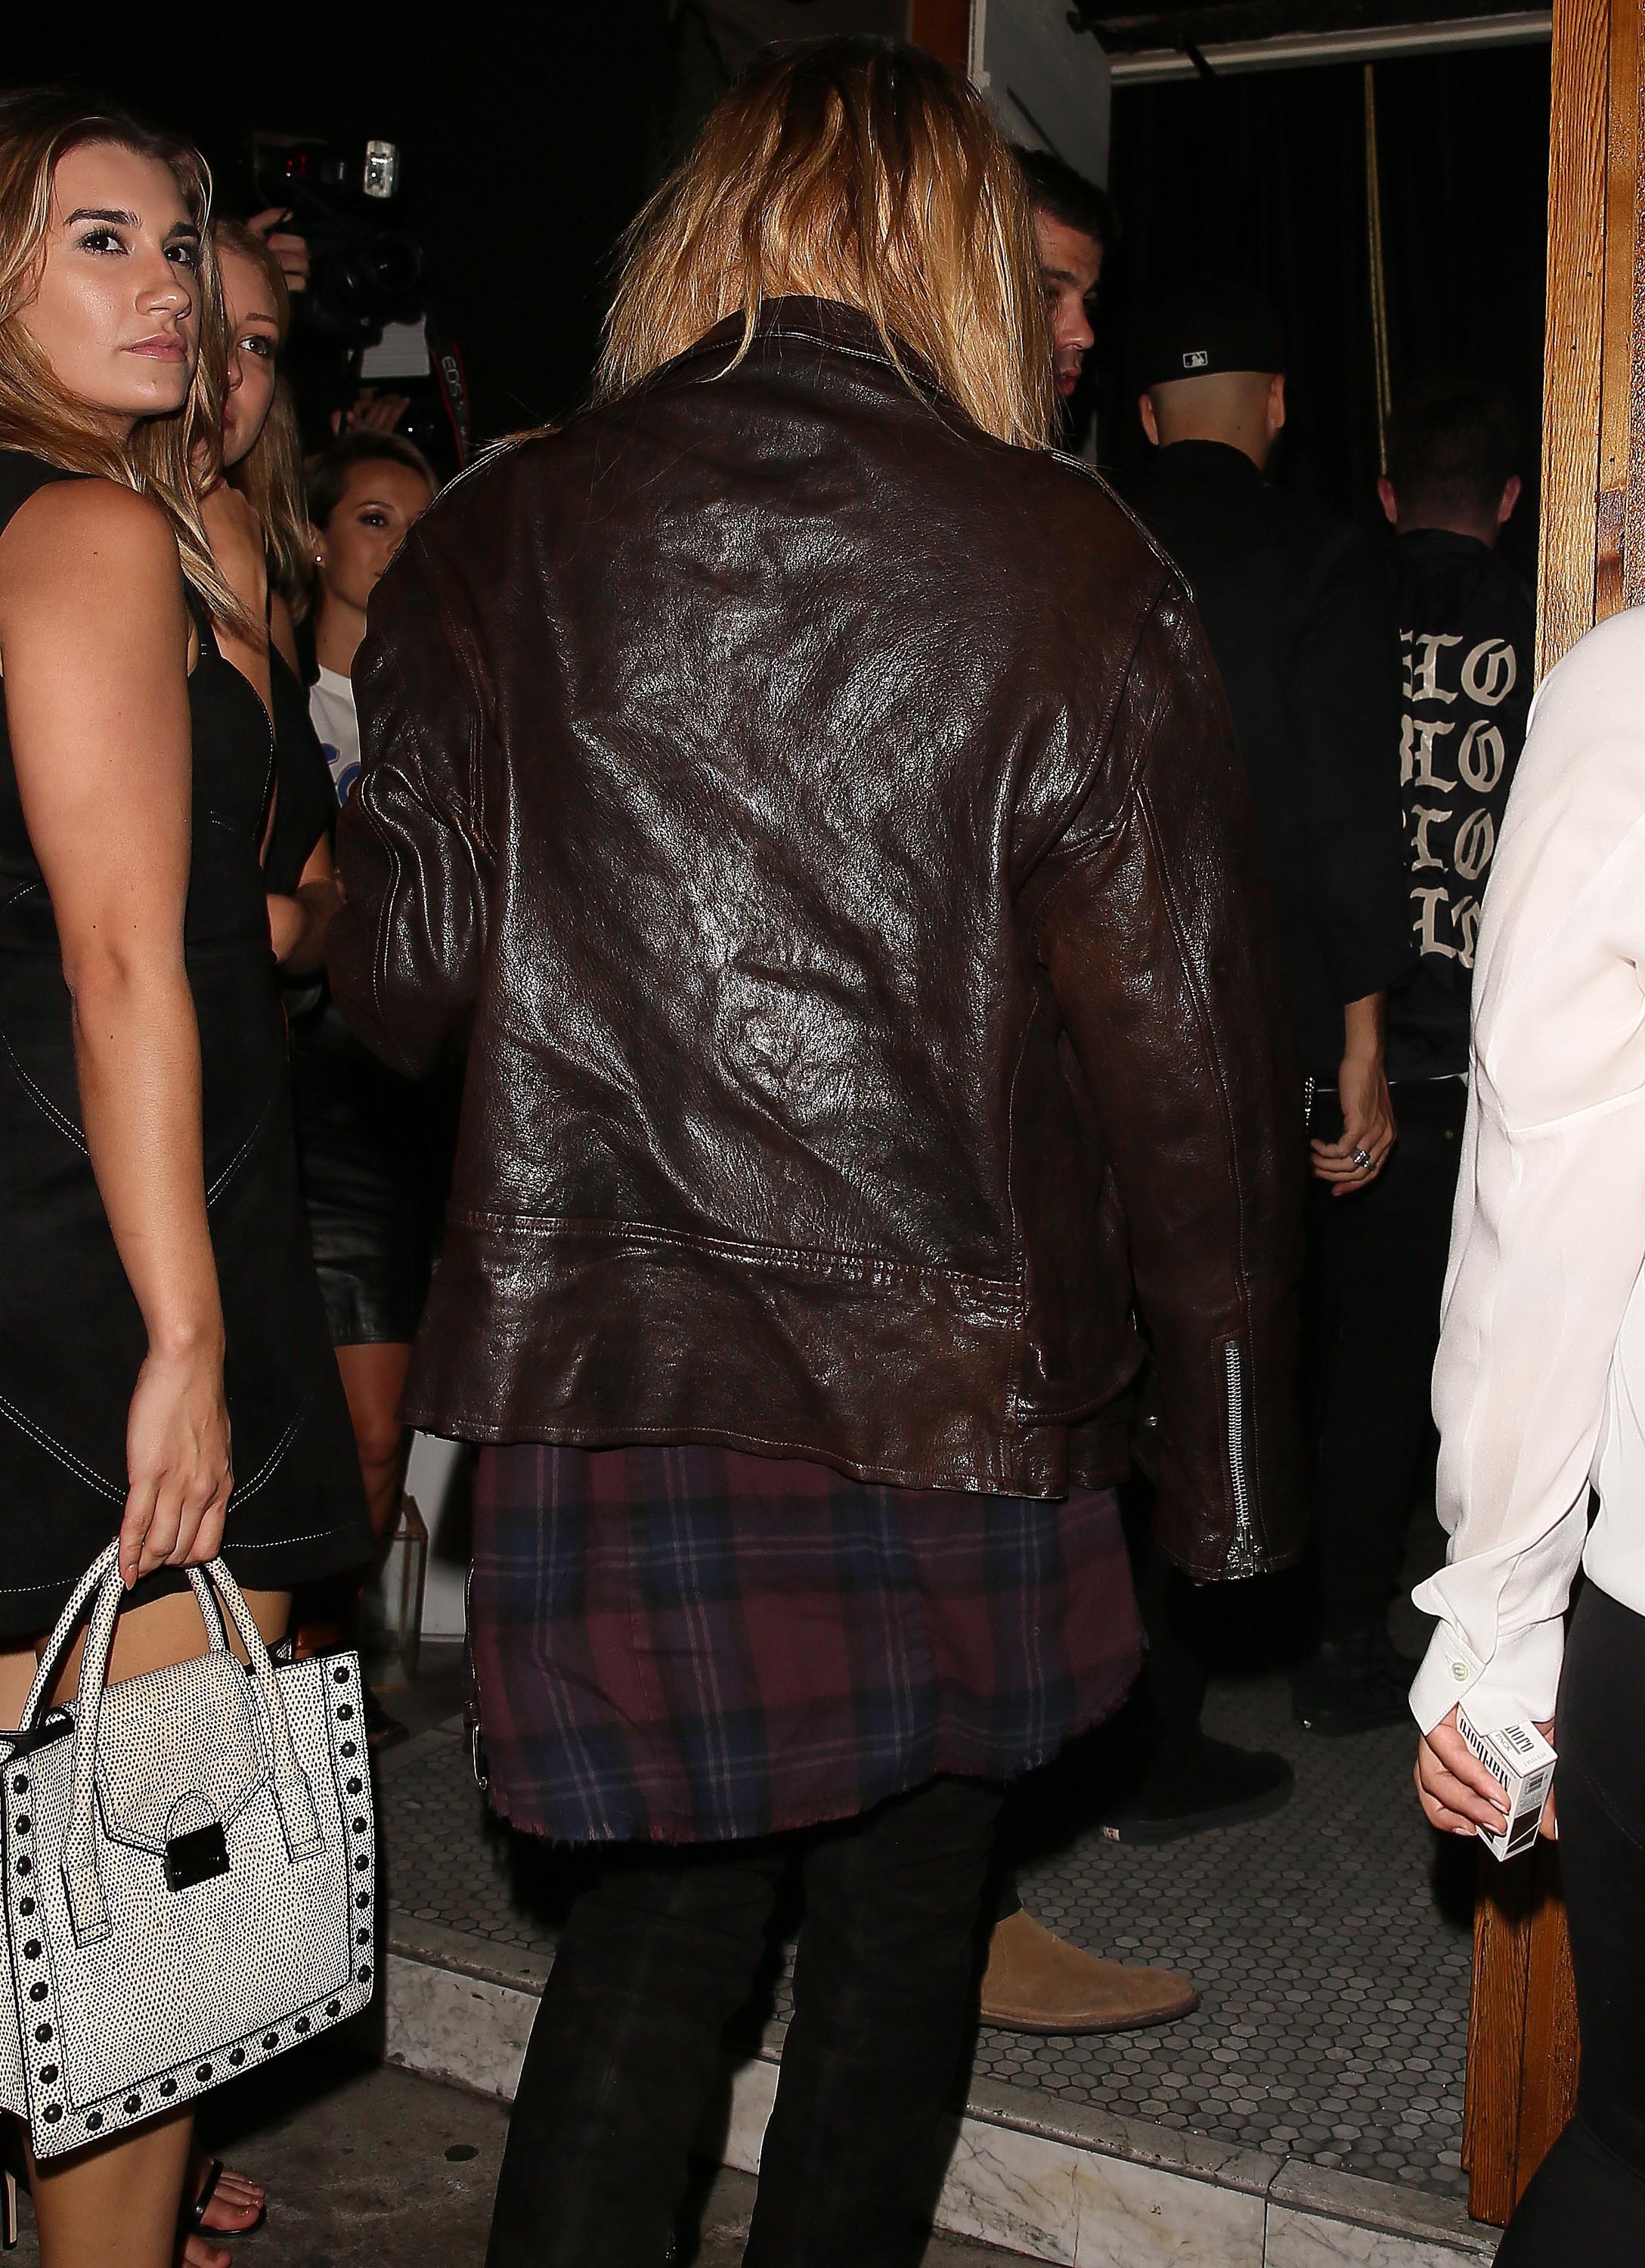 Hailey Baldwin at The Nice Guy in West Hollywood 9/2/16